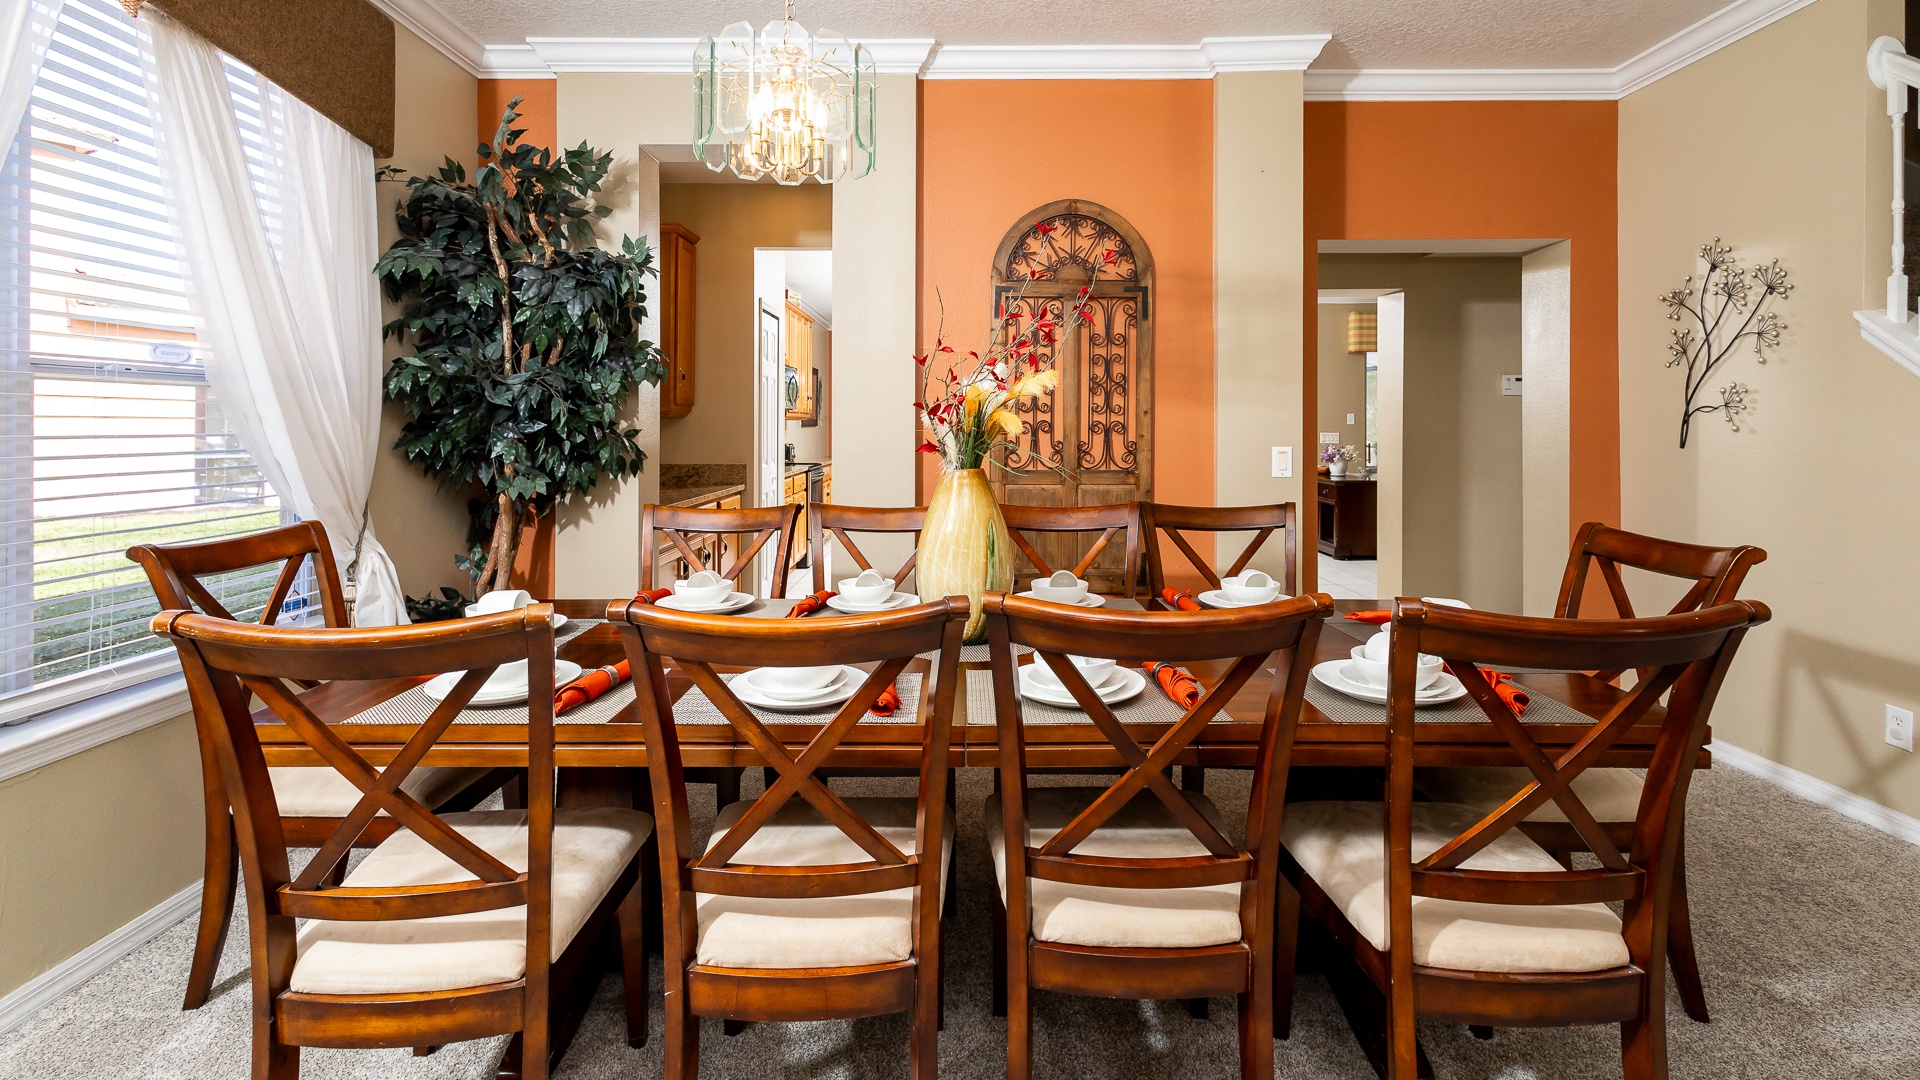 Elegant meals can be enjoyed at the formal dining table, with seating for 10